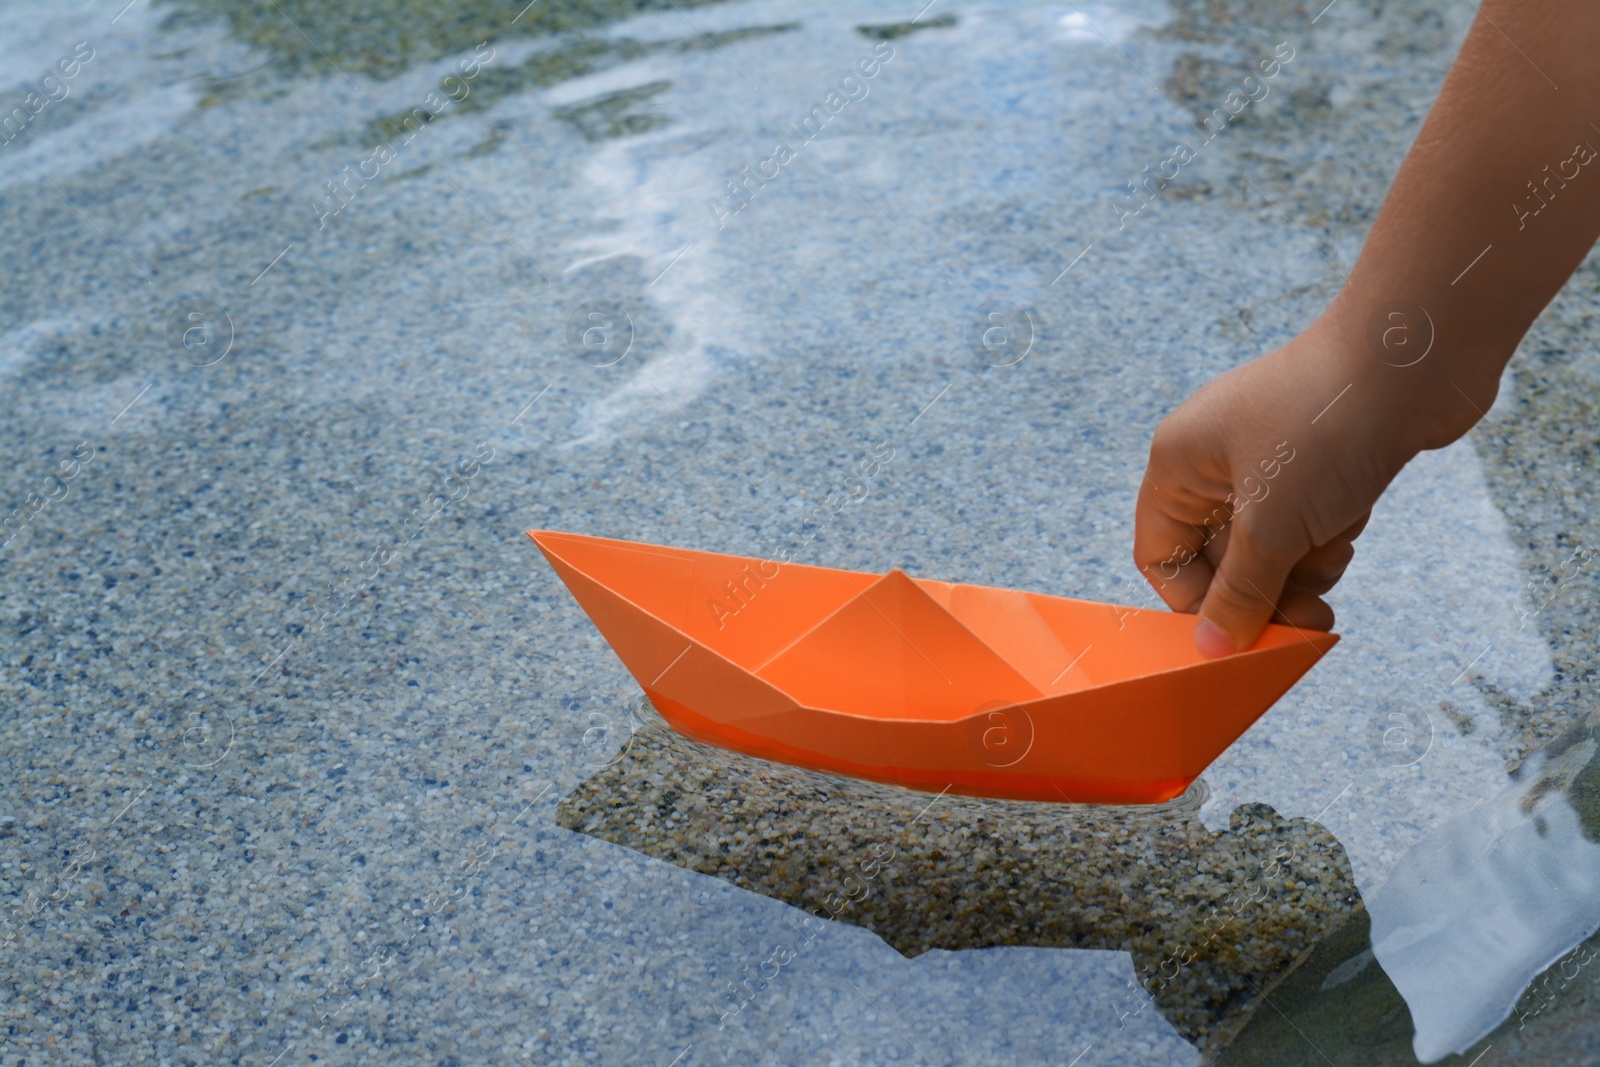 Photo of Kid launching small orange paper boat on water outdoors, closeup